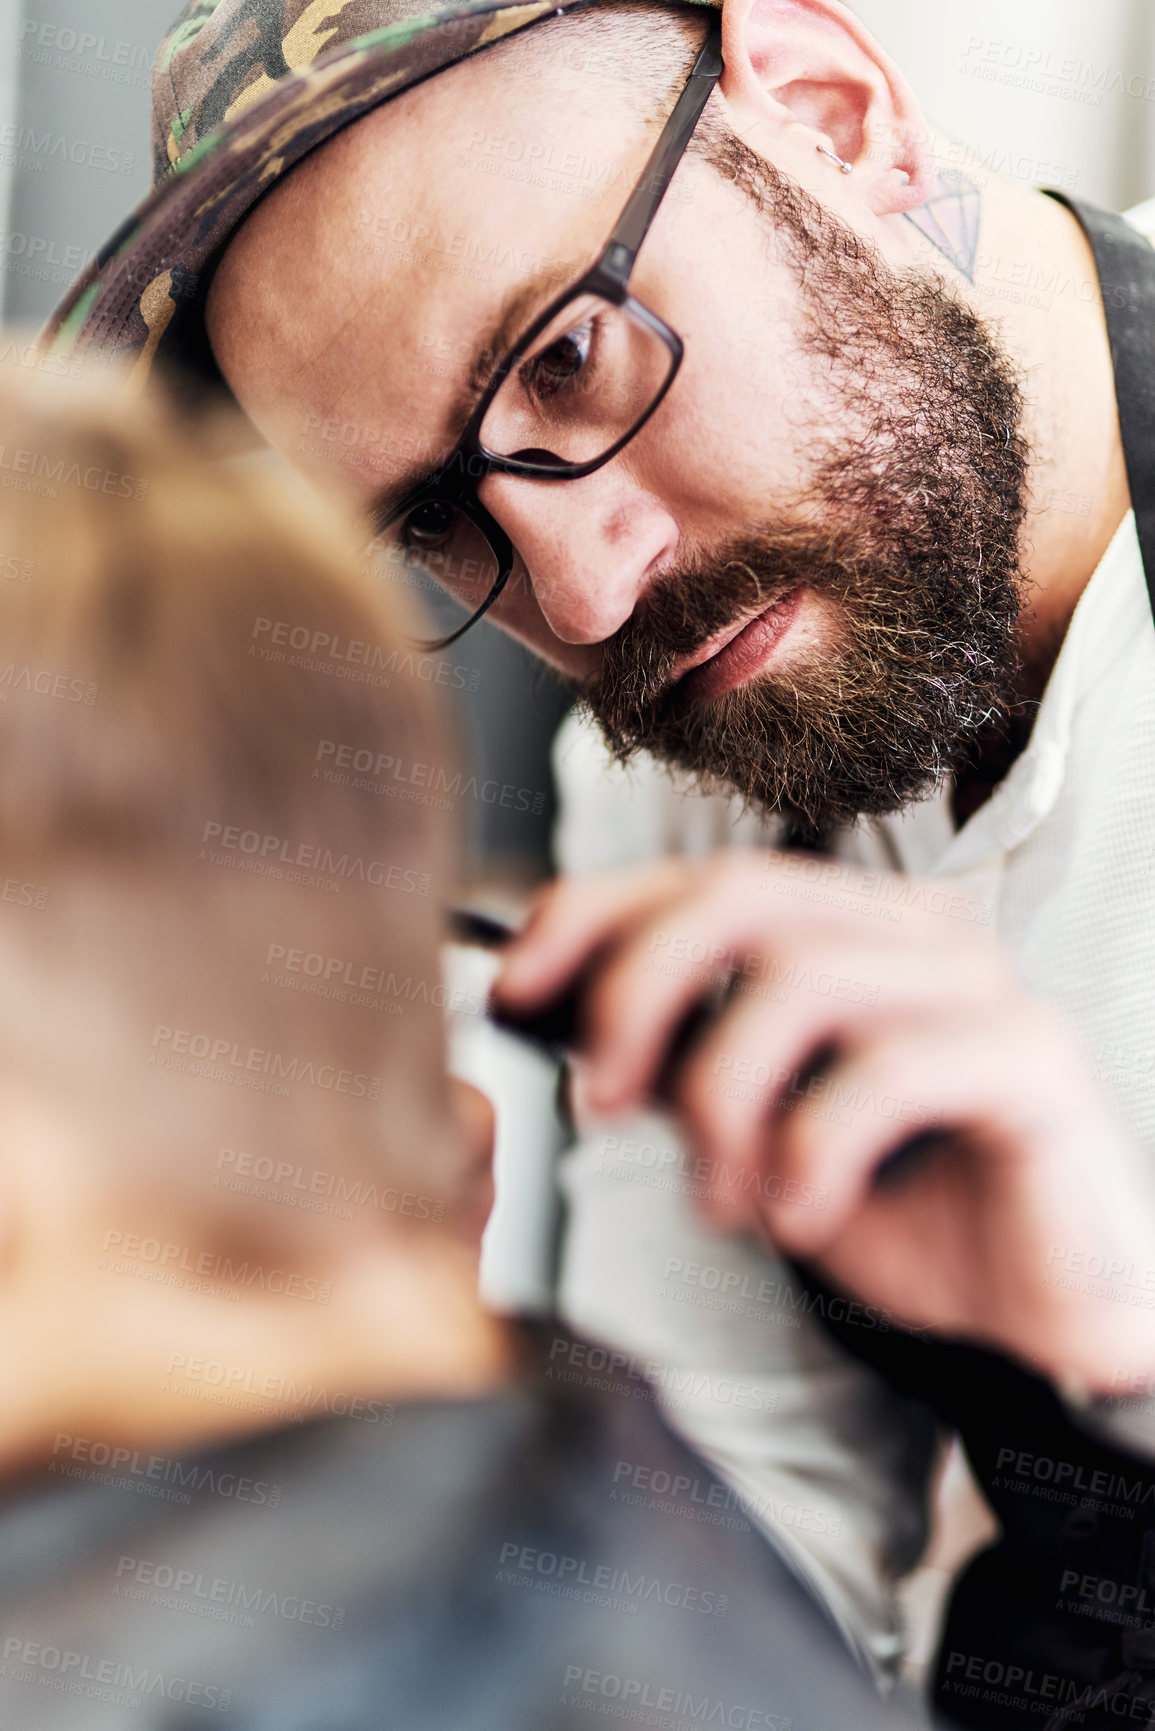 Buy stock photo Cropped shot of a handsome young barber giving a little boy a haircut inside a barbershop